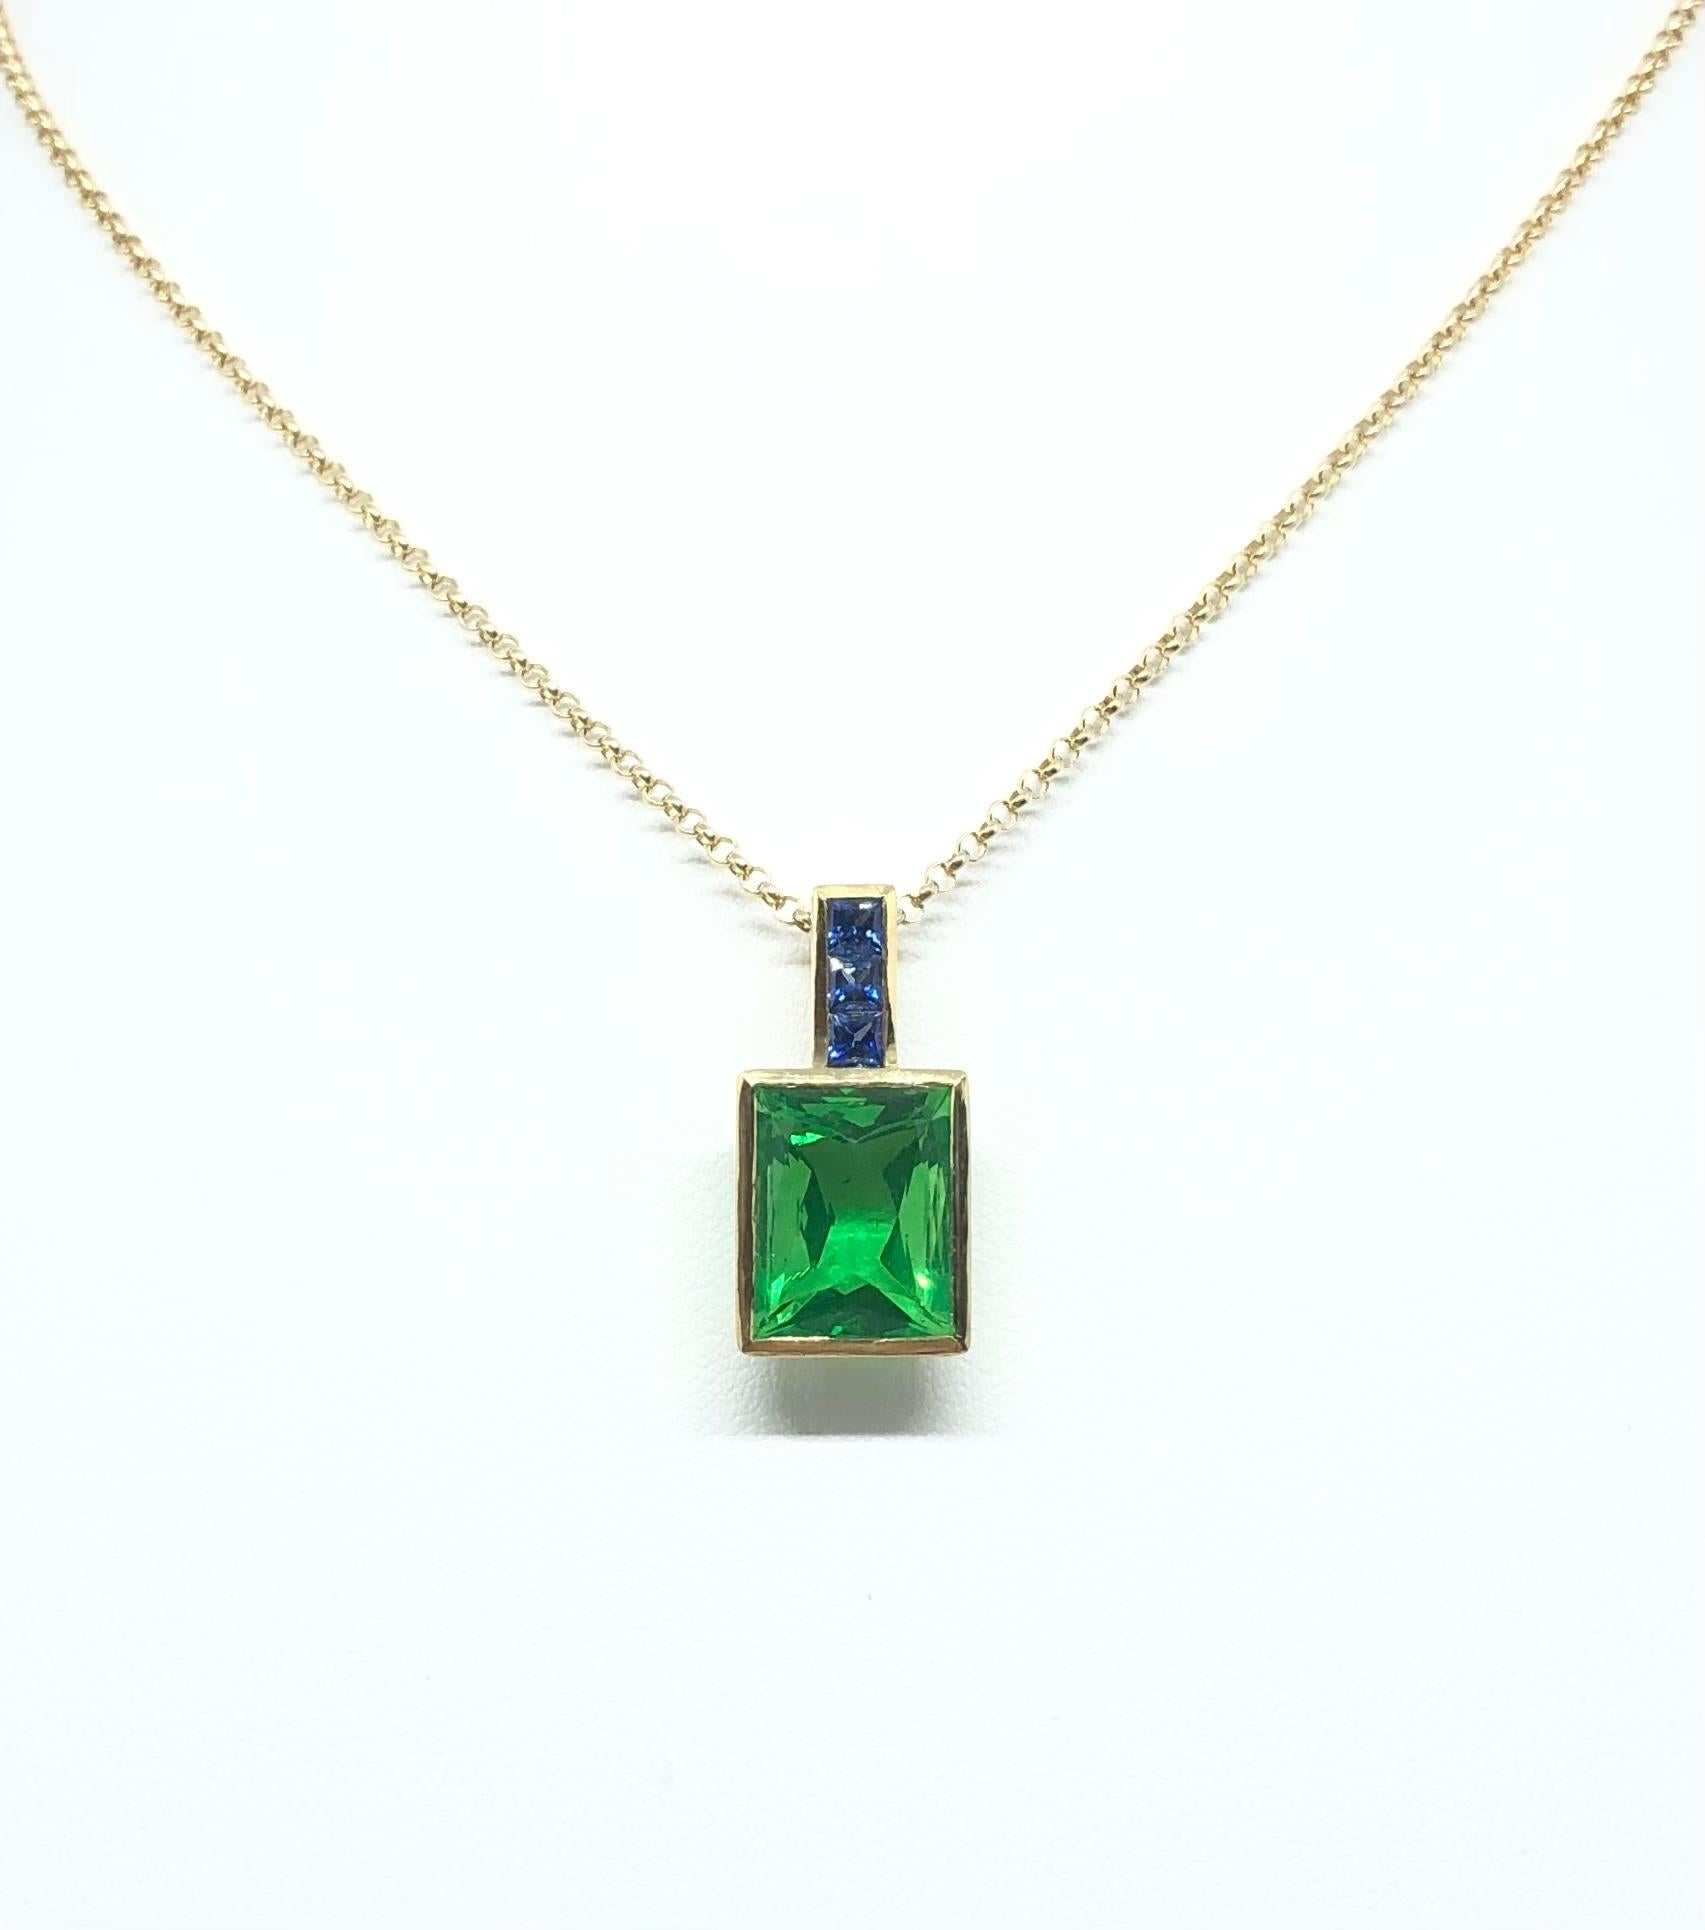 Fluorite 8.87 carats with Blue Sapphire 0.47 carats Pendant set in 18 Karat Gold Settings
(chain not included)

Width: 1.2 cm 
Length: 2.5 cm
Total Weight: 5.88  grams

